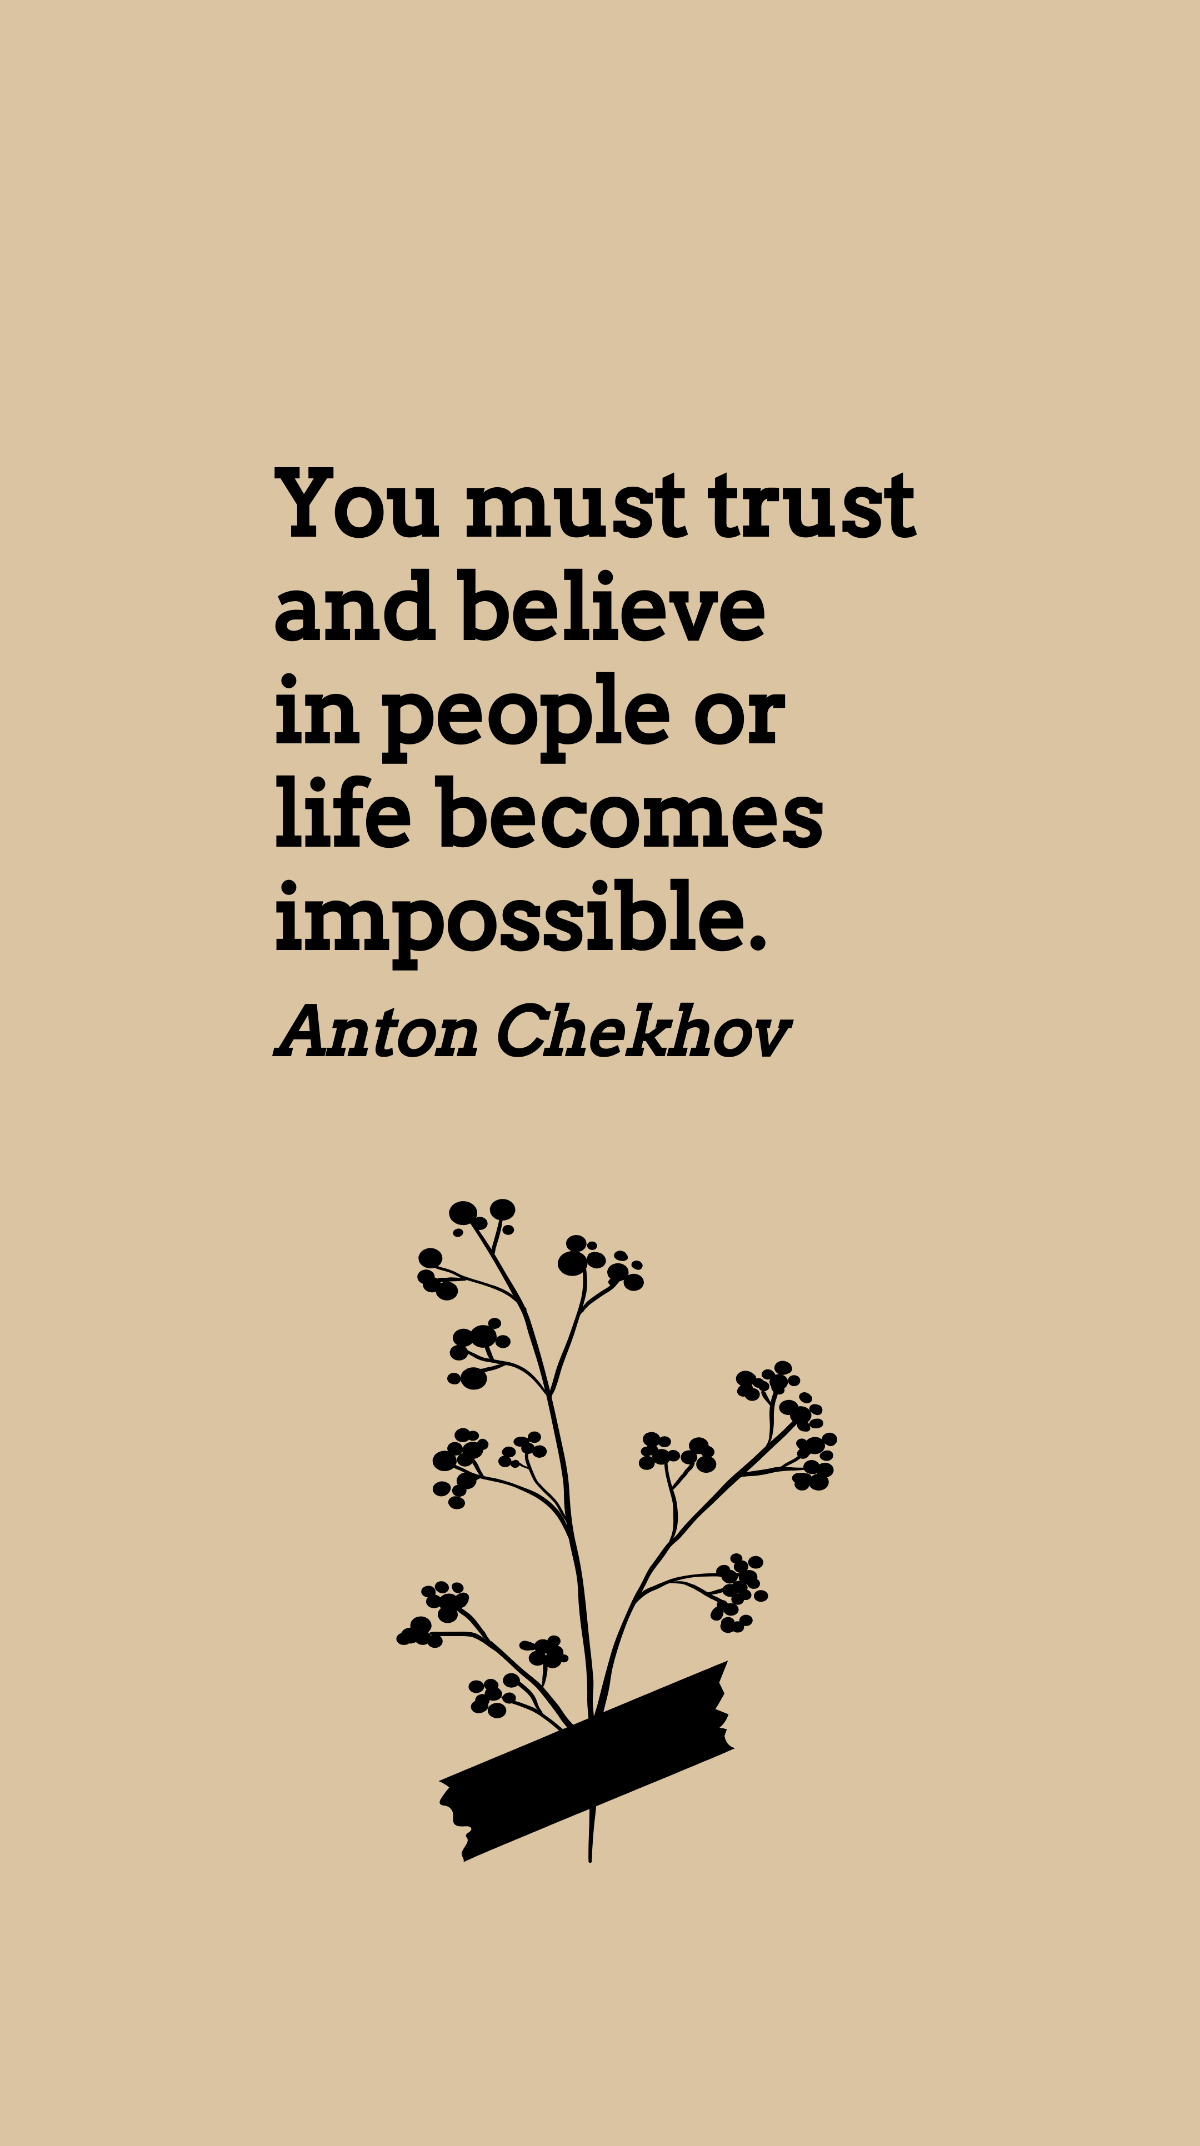 Free Anton Chekhov - You must trust and believe in people or life becomes impossible. Template